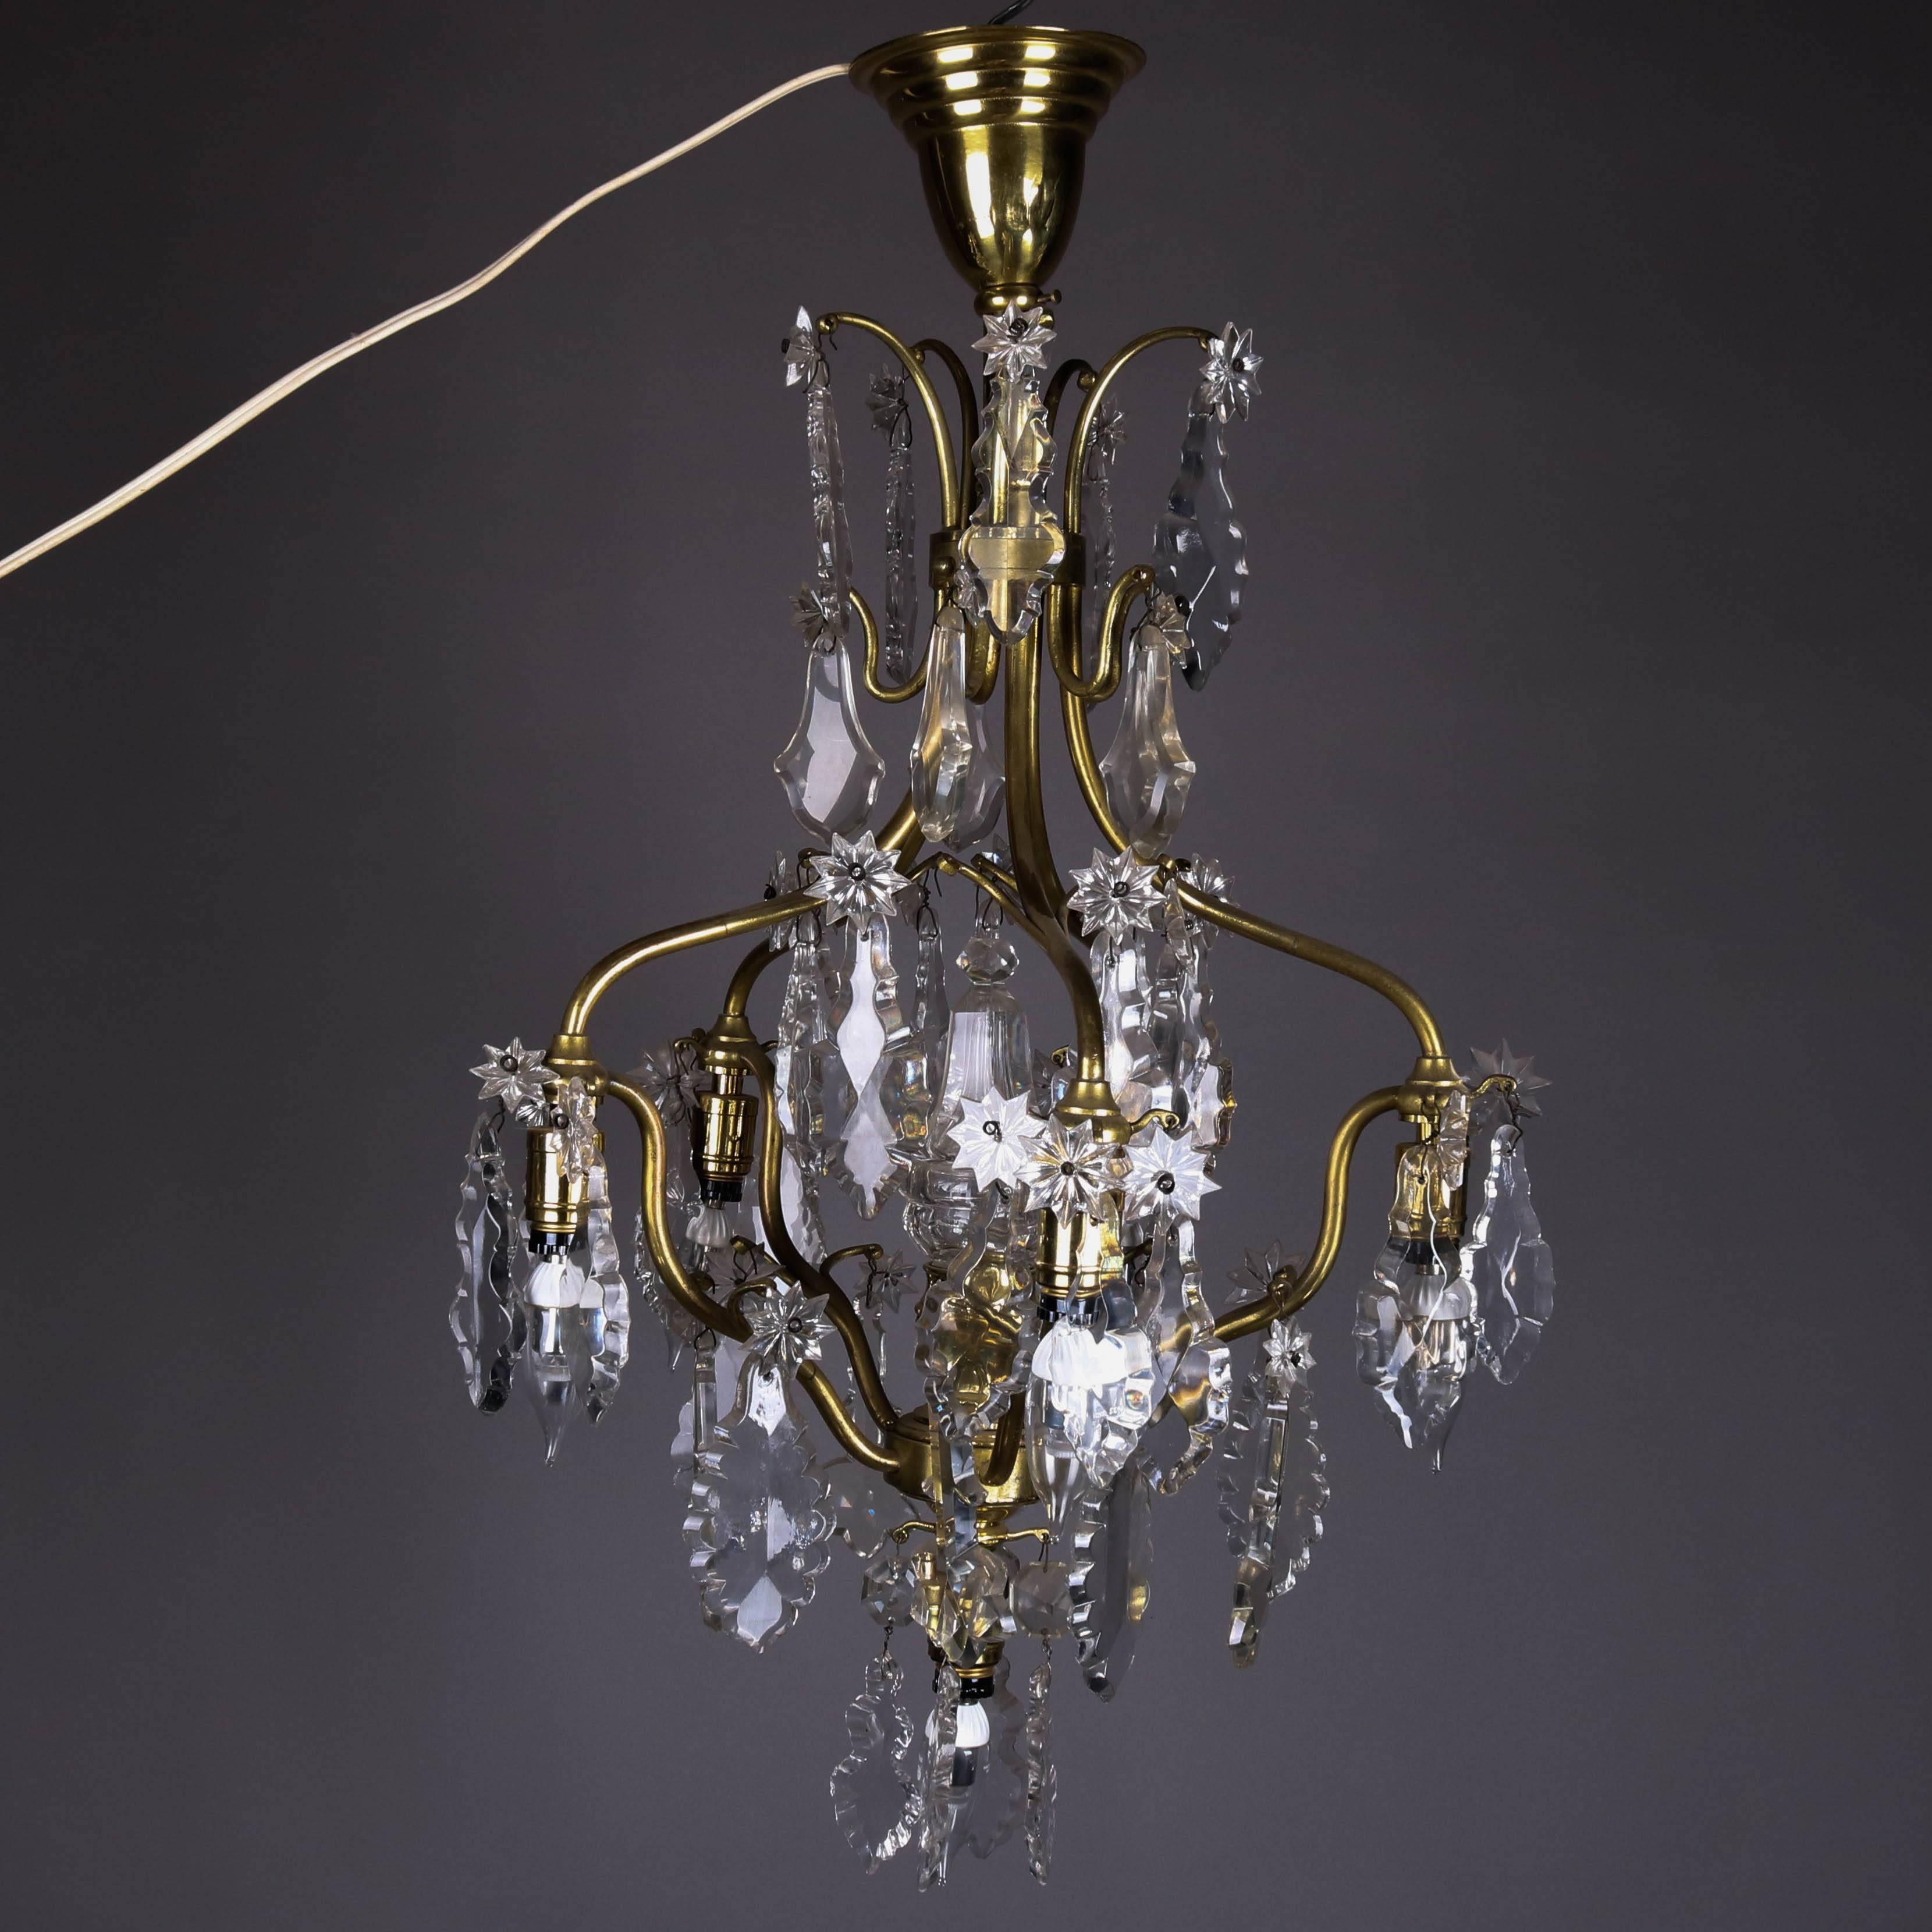 French five-light chandelier features curvilinear brass frame decorated with stylized flower and leaf form cut crystal prisms, 20th century

Measures: 32